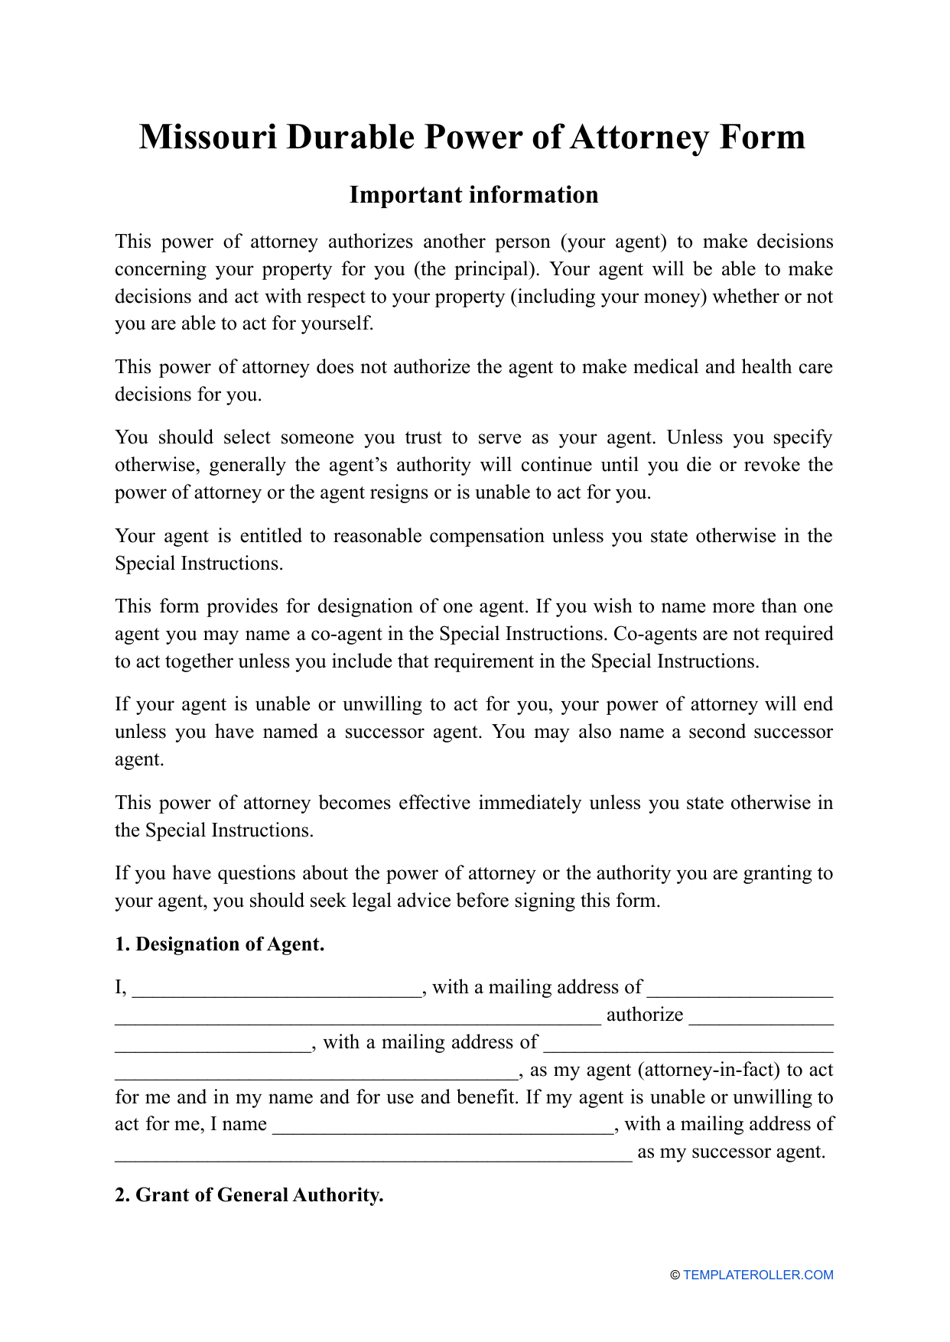 Durable Power of Attorney Form - Missouri, Page 1